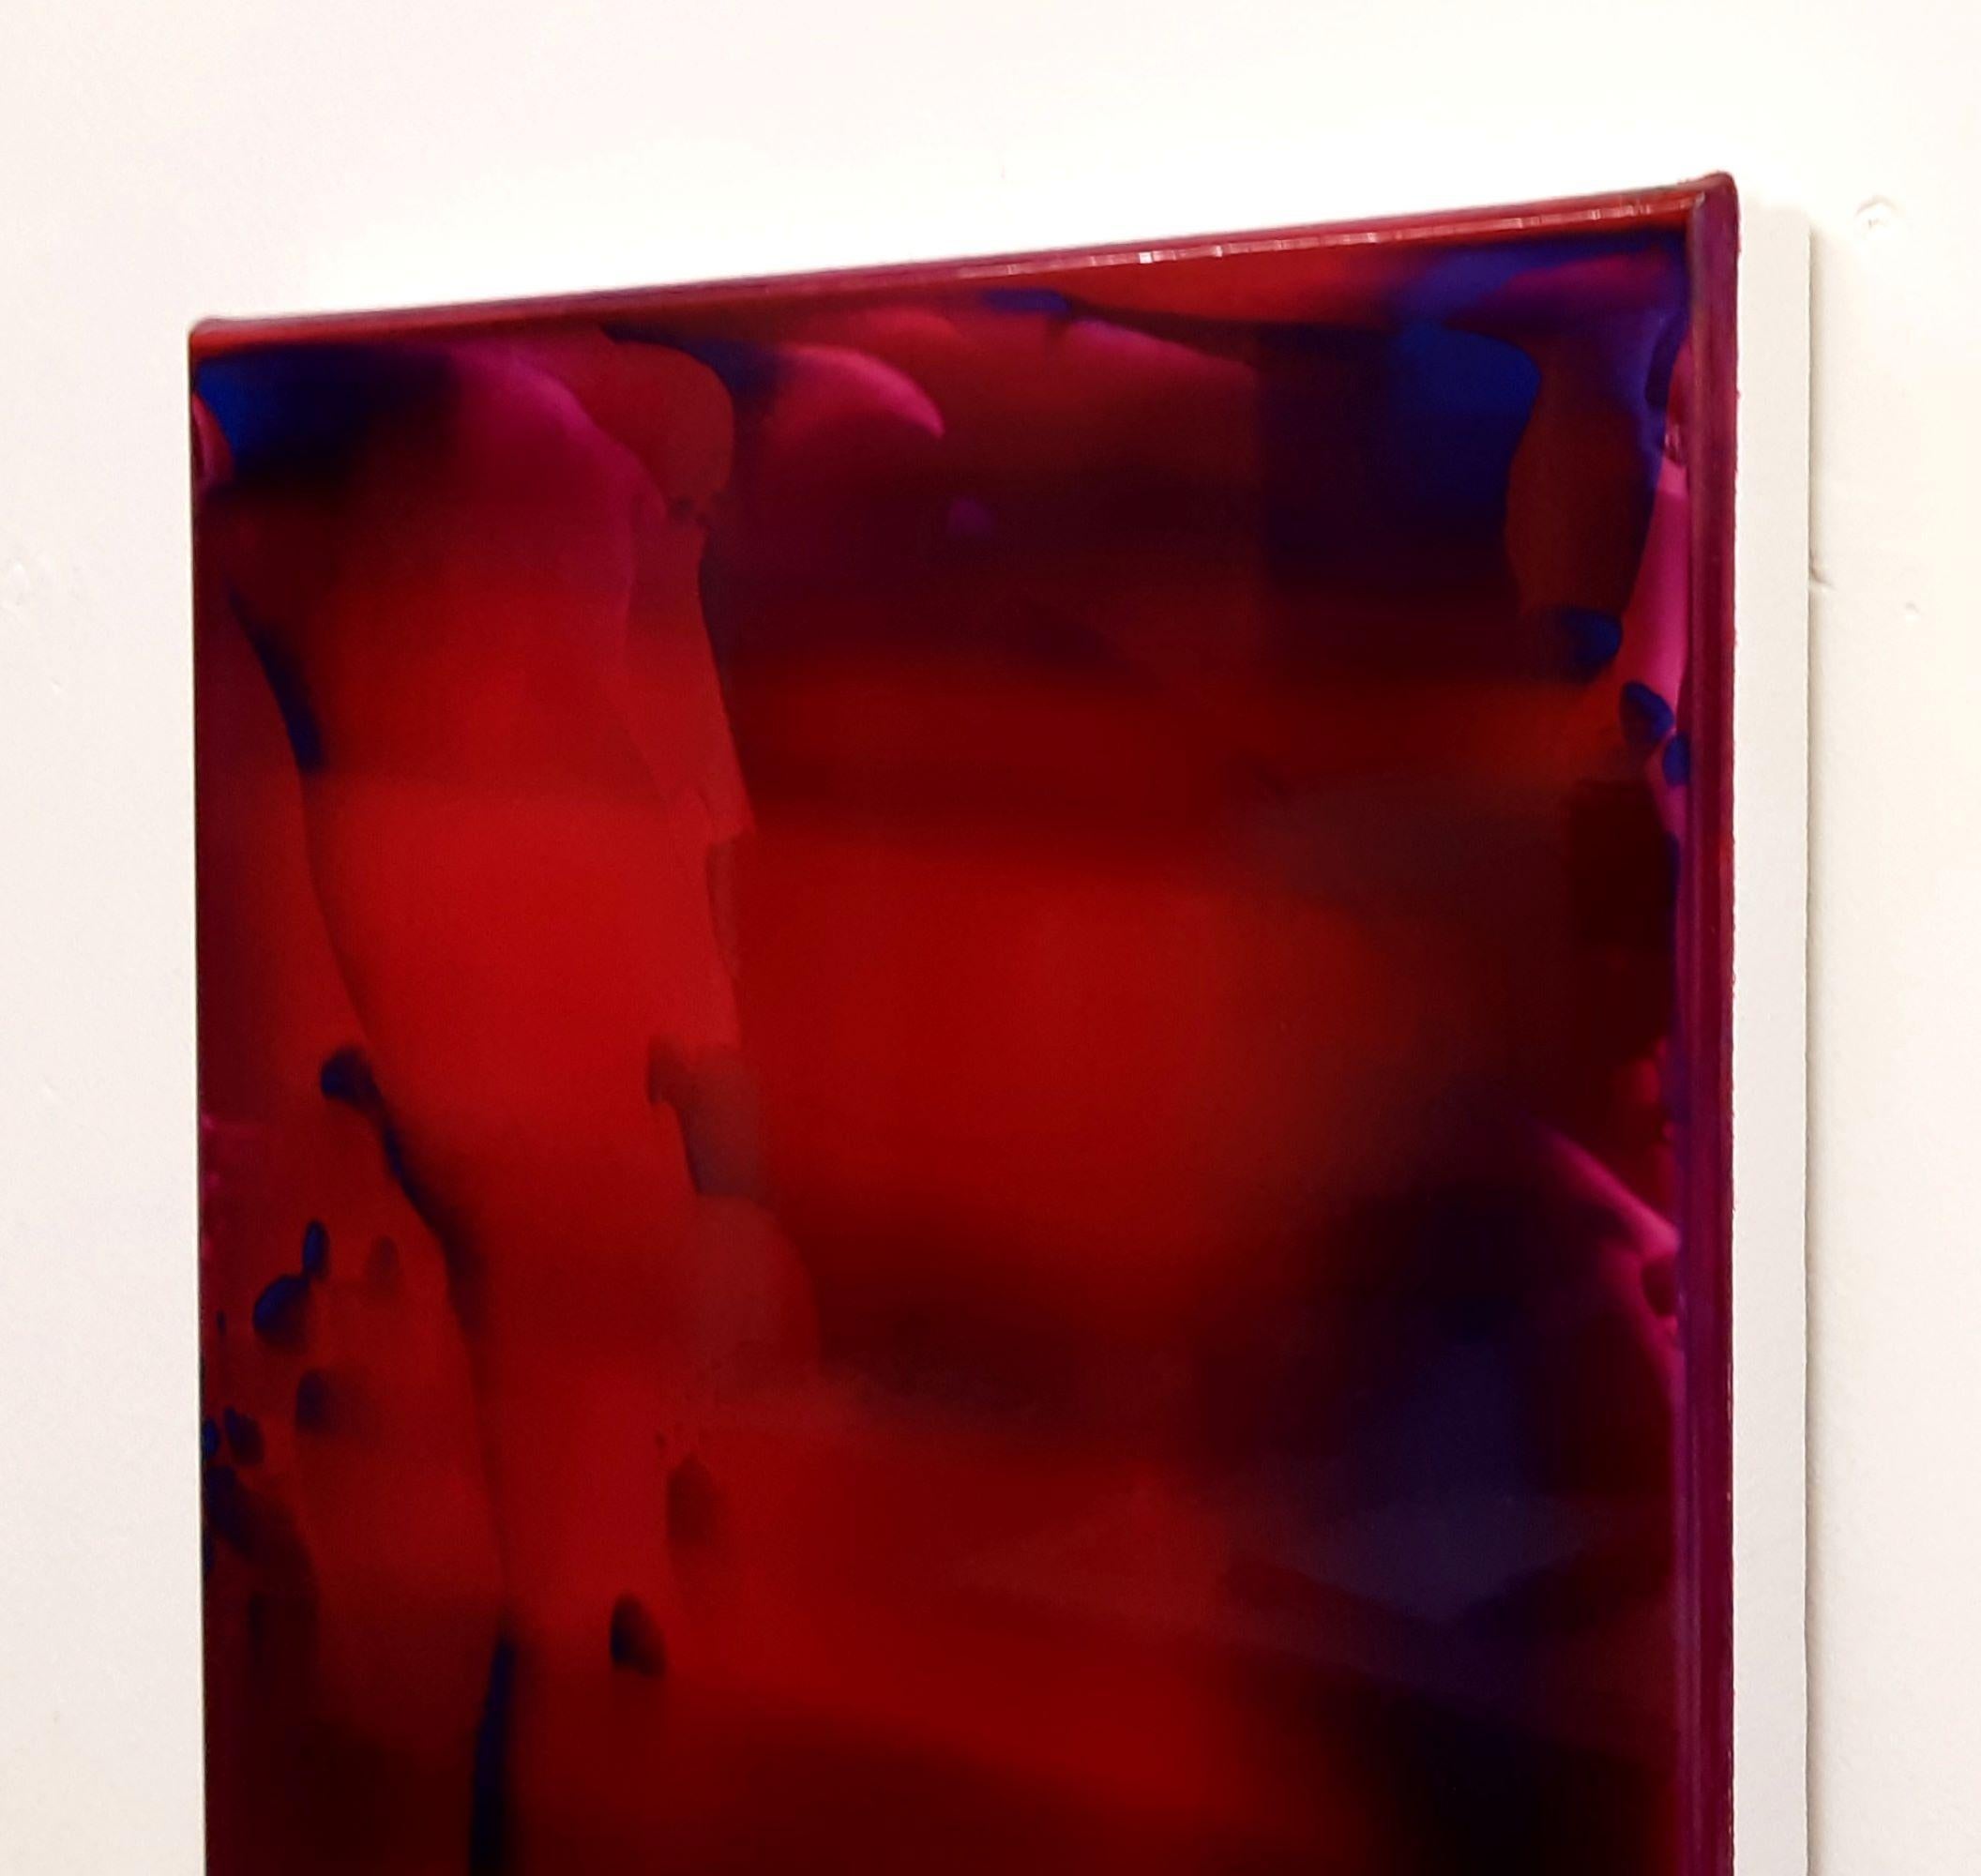 Resonance (30/21) by James Lumsden - Abstract painting, deep red, glossy For Sale 3